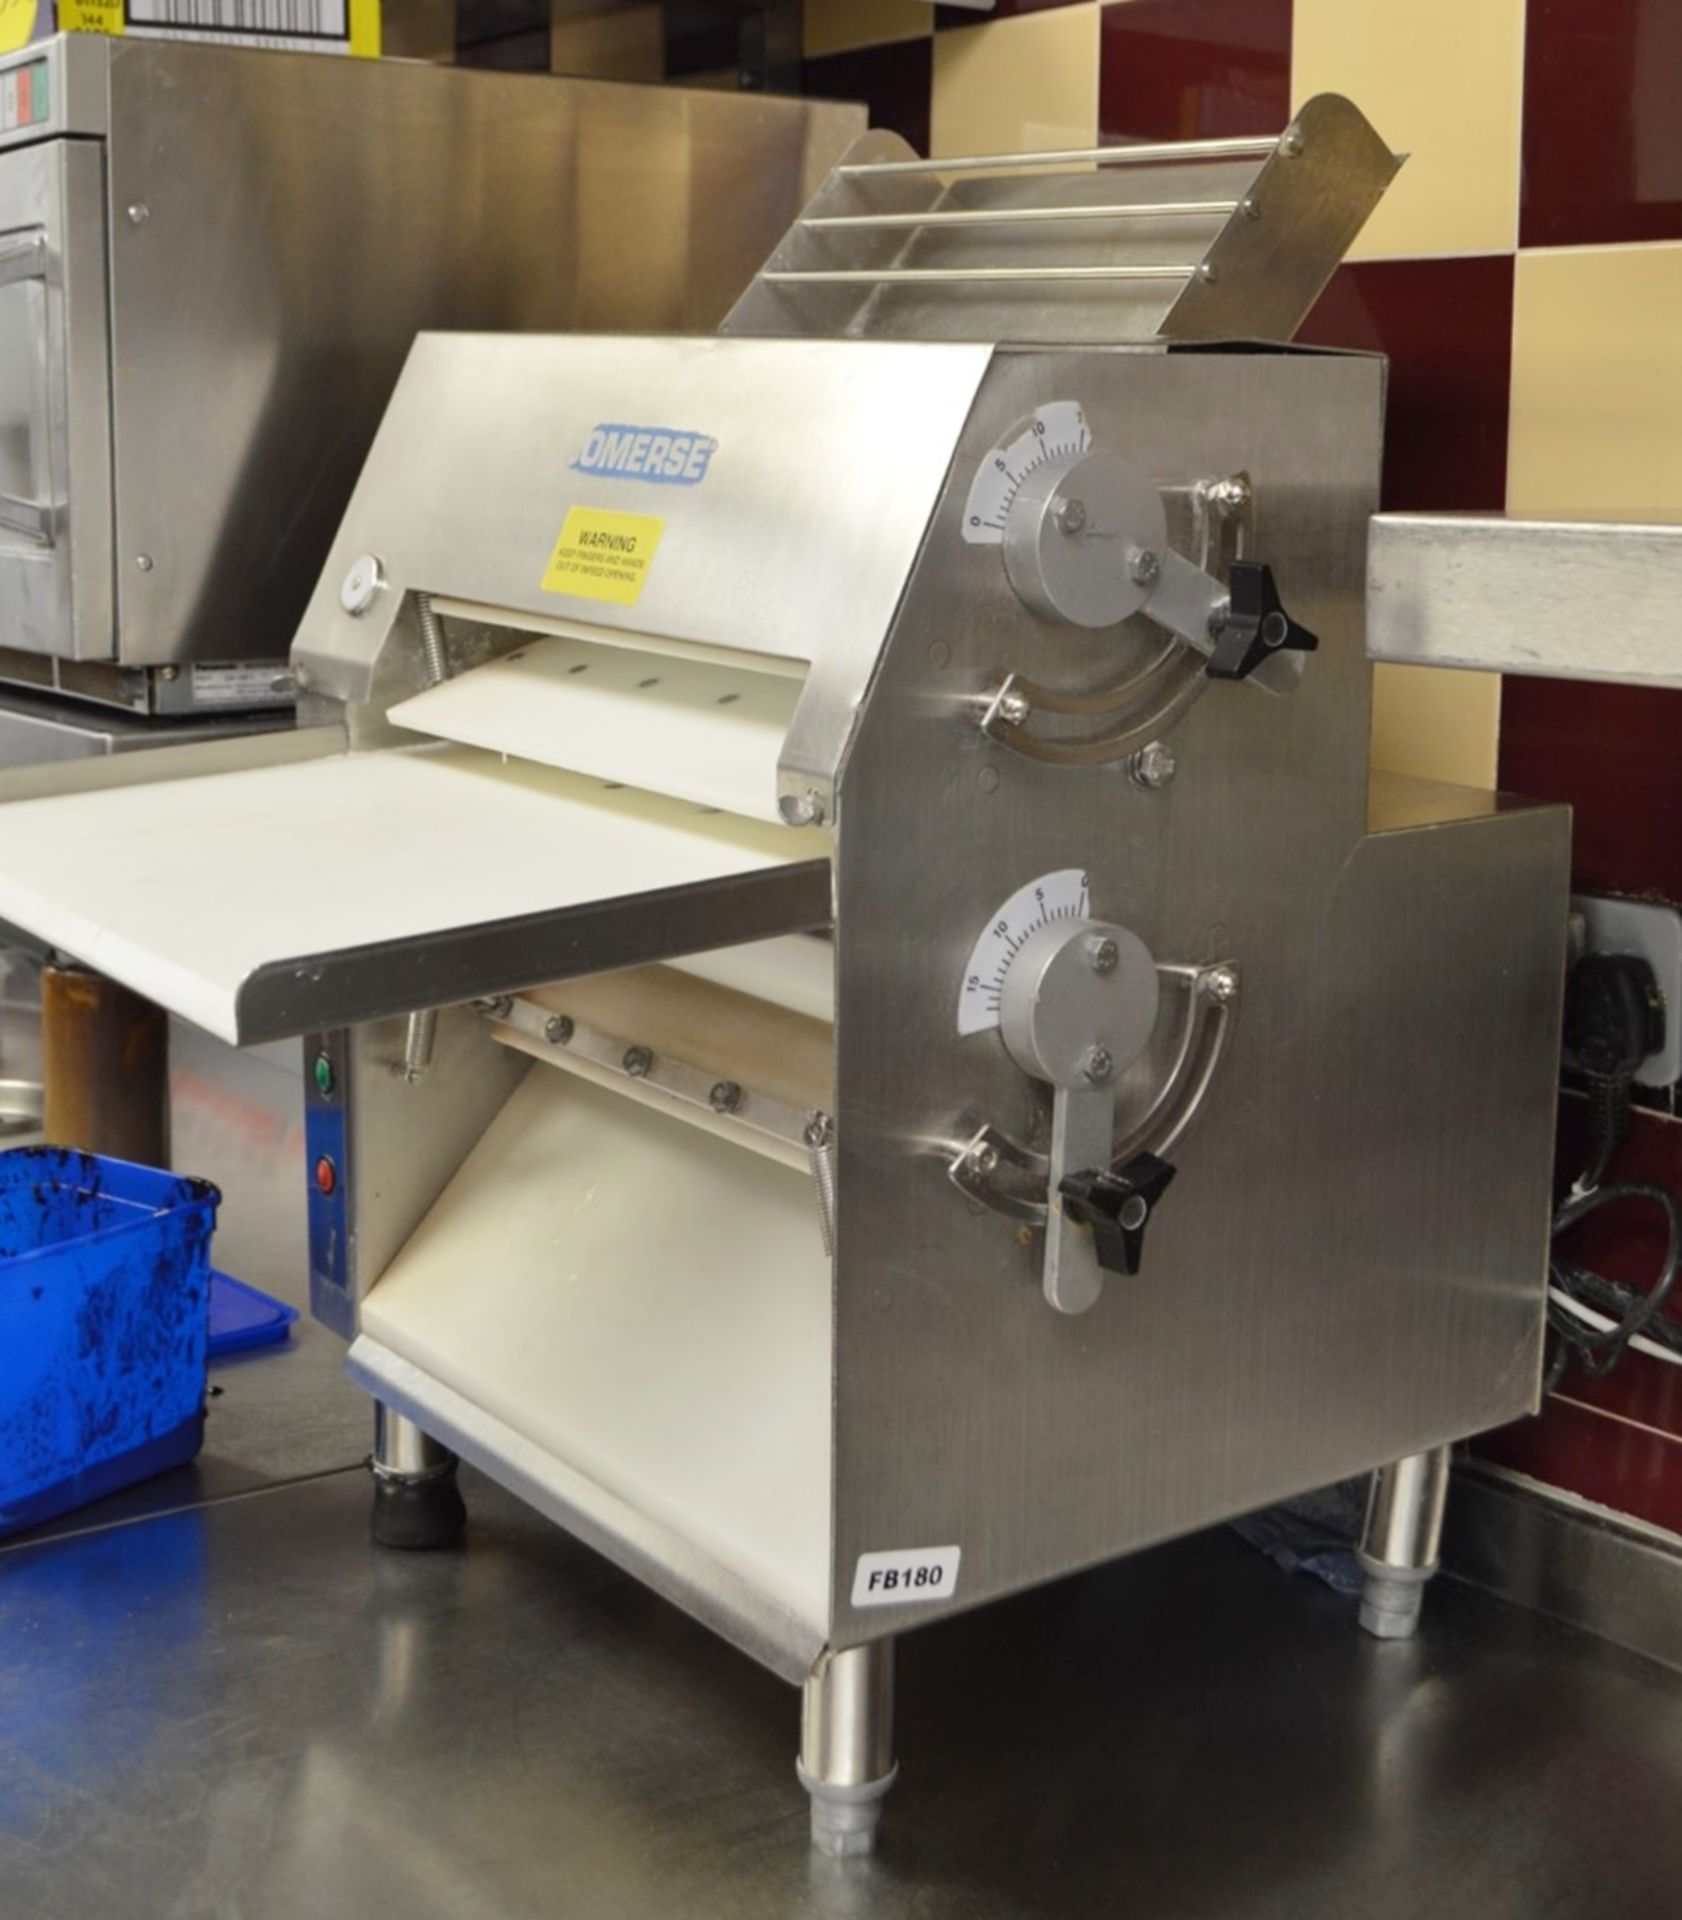 1 x Somerset Dough Roller - Model CDR1550 - Suitable For Pizza, Naans, Chatati Wraps etc - Ref FB180 - Image 4 of 6